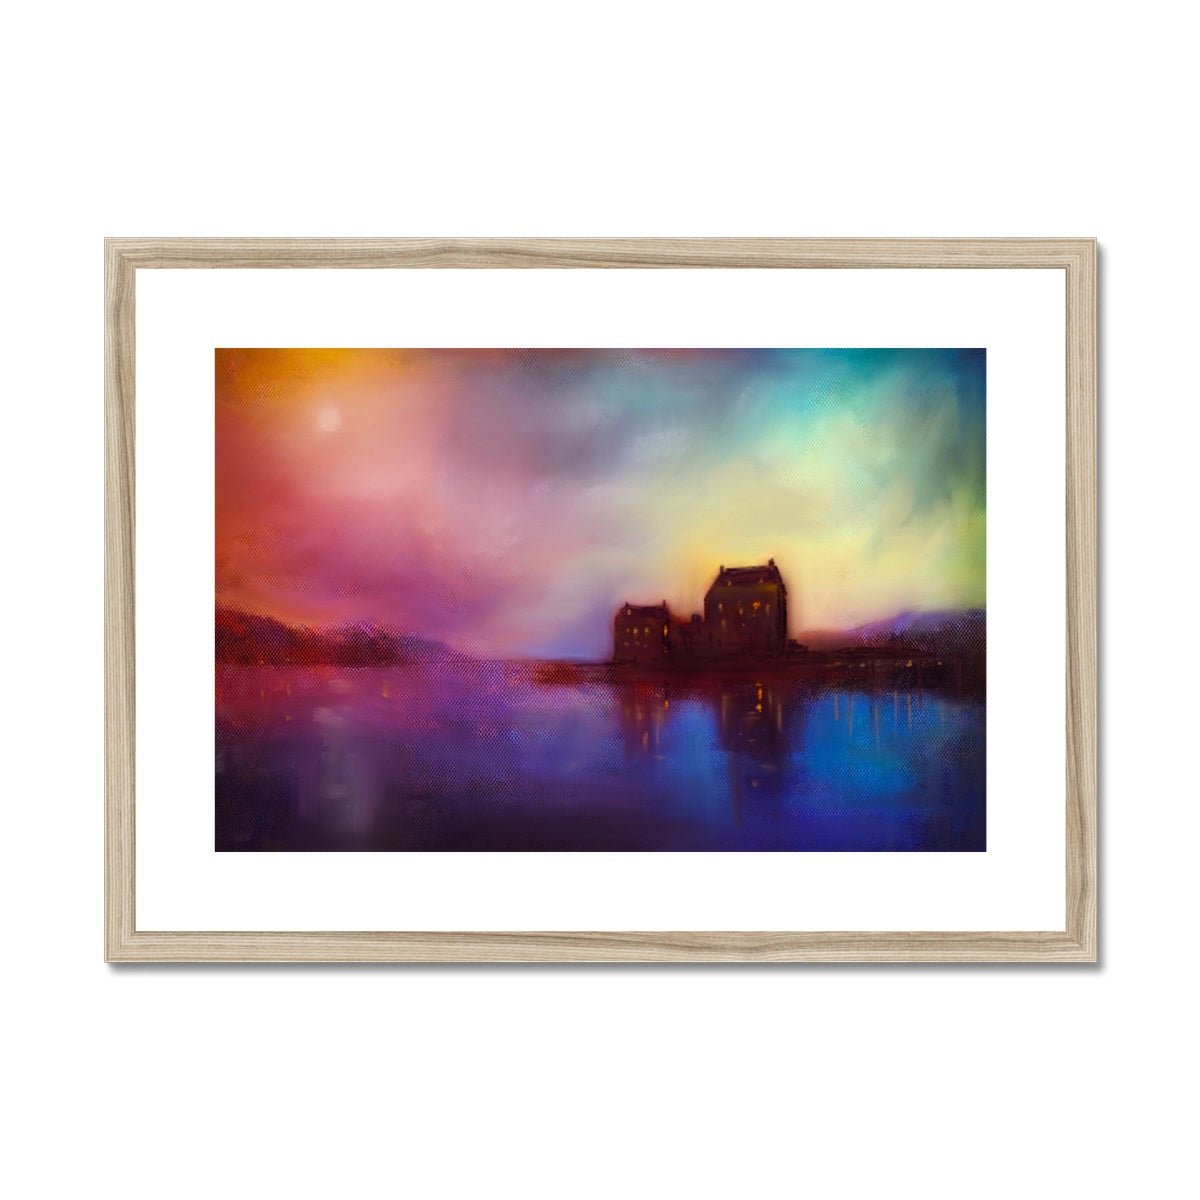 Eilean Donan Castle Sunset Painting | Framed & Mounted Prints From Scotland-Framed & Mounted Prints-Historic & Iconic Scotland Art Gallery-A2 Landscape-Natural Frame-Paintings, Prints, Homeware, Art Gifts From Scotland By Scottish Artist Kevin Hunter